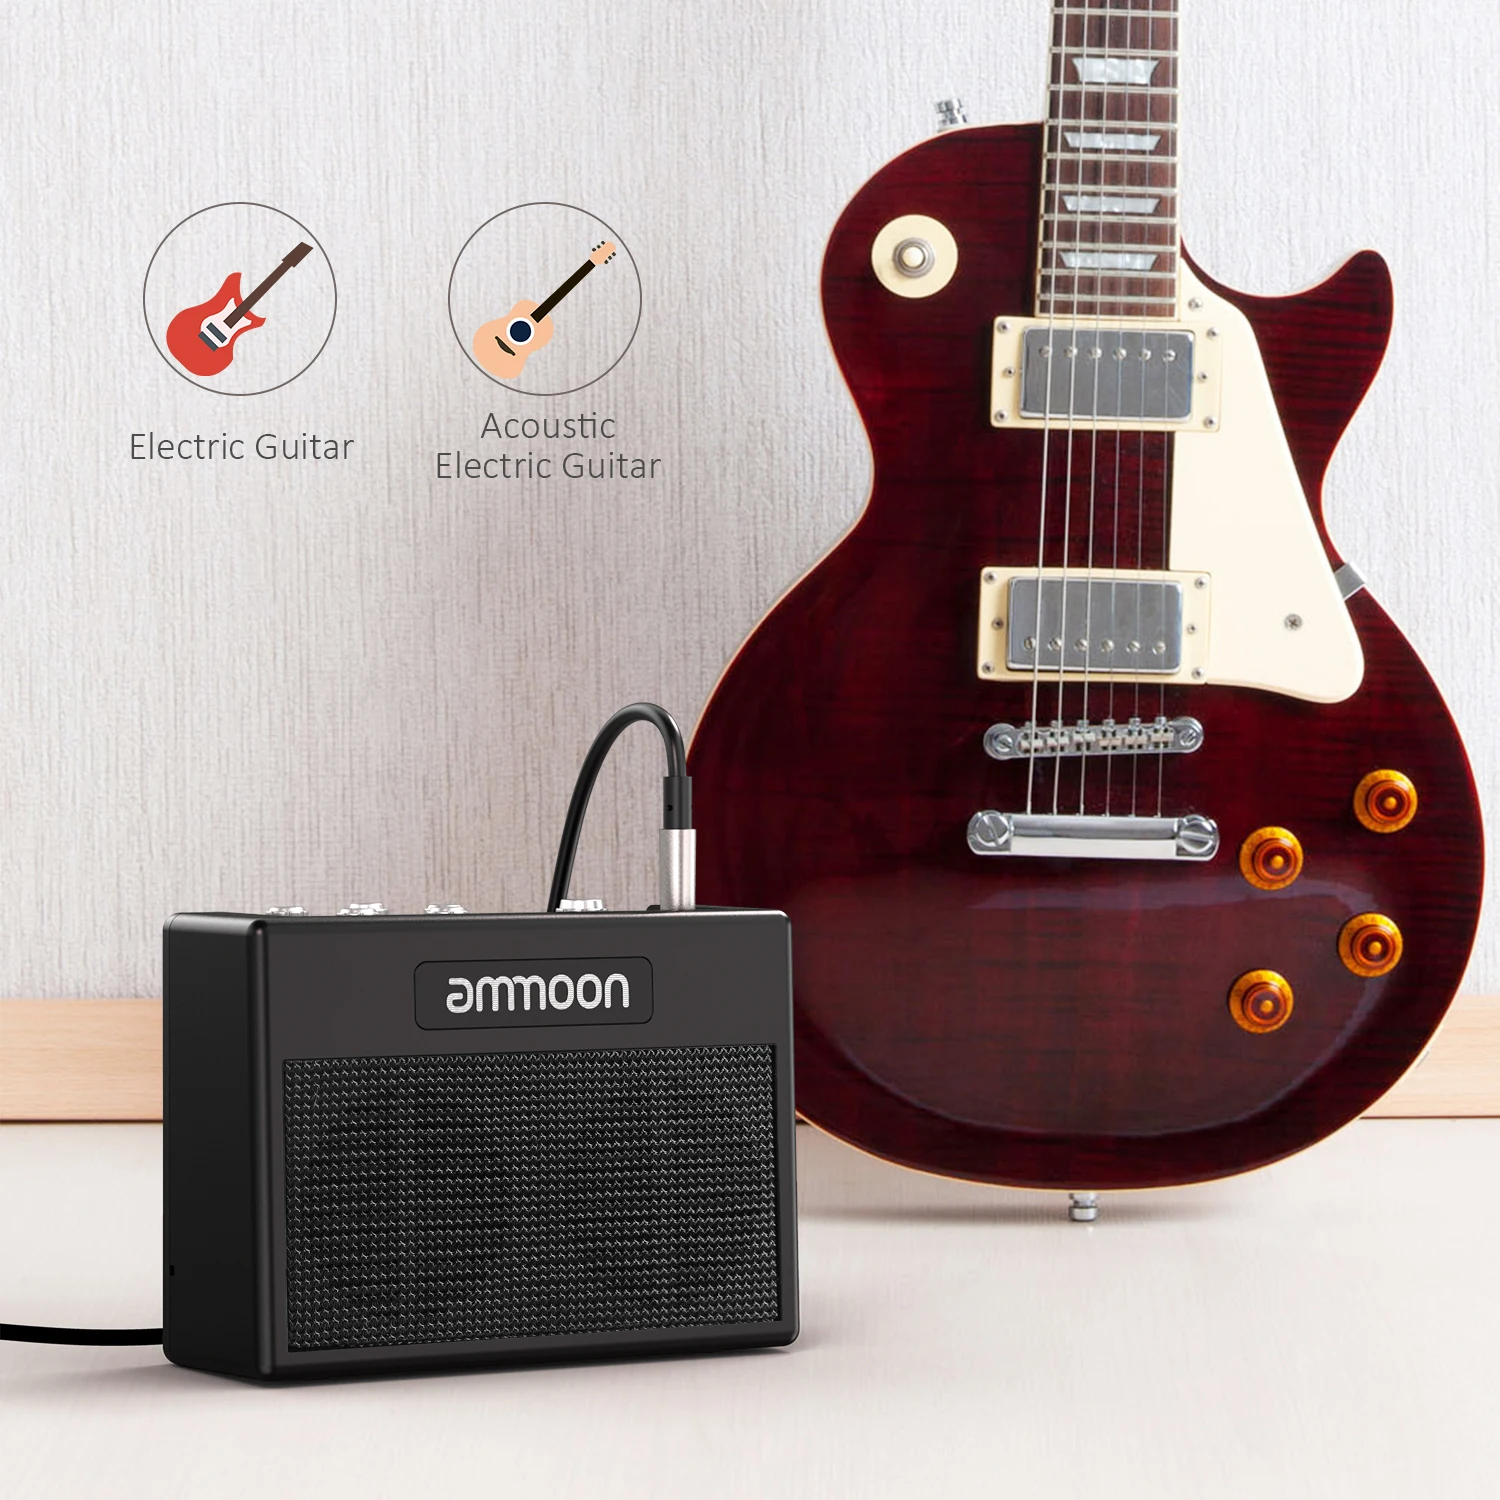 ammoon POCKAMP Guitar Amplifier Built-in Multi-effects 80 Drum Rhythms Support Tuner Tap Tempo Function with Power Adapter enlarge